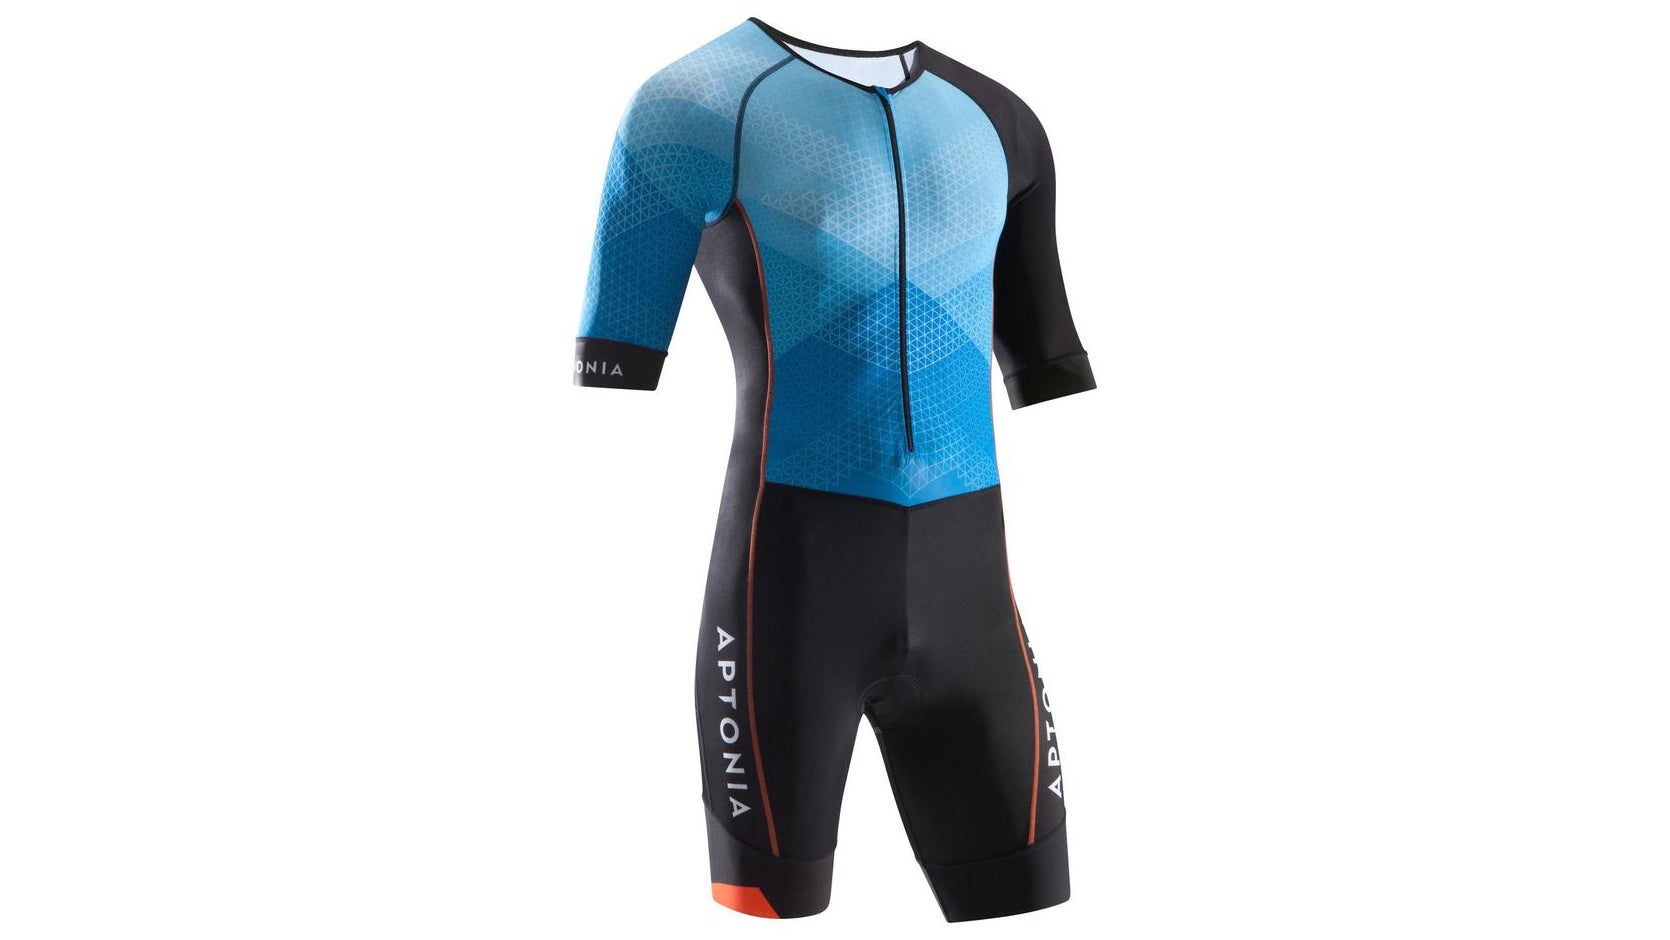 The Best Triathlon Suit For Racing: What to Look For, Plus Our Favorites